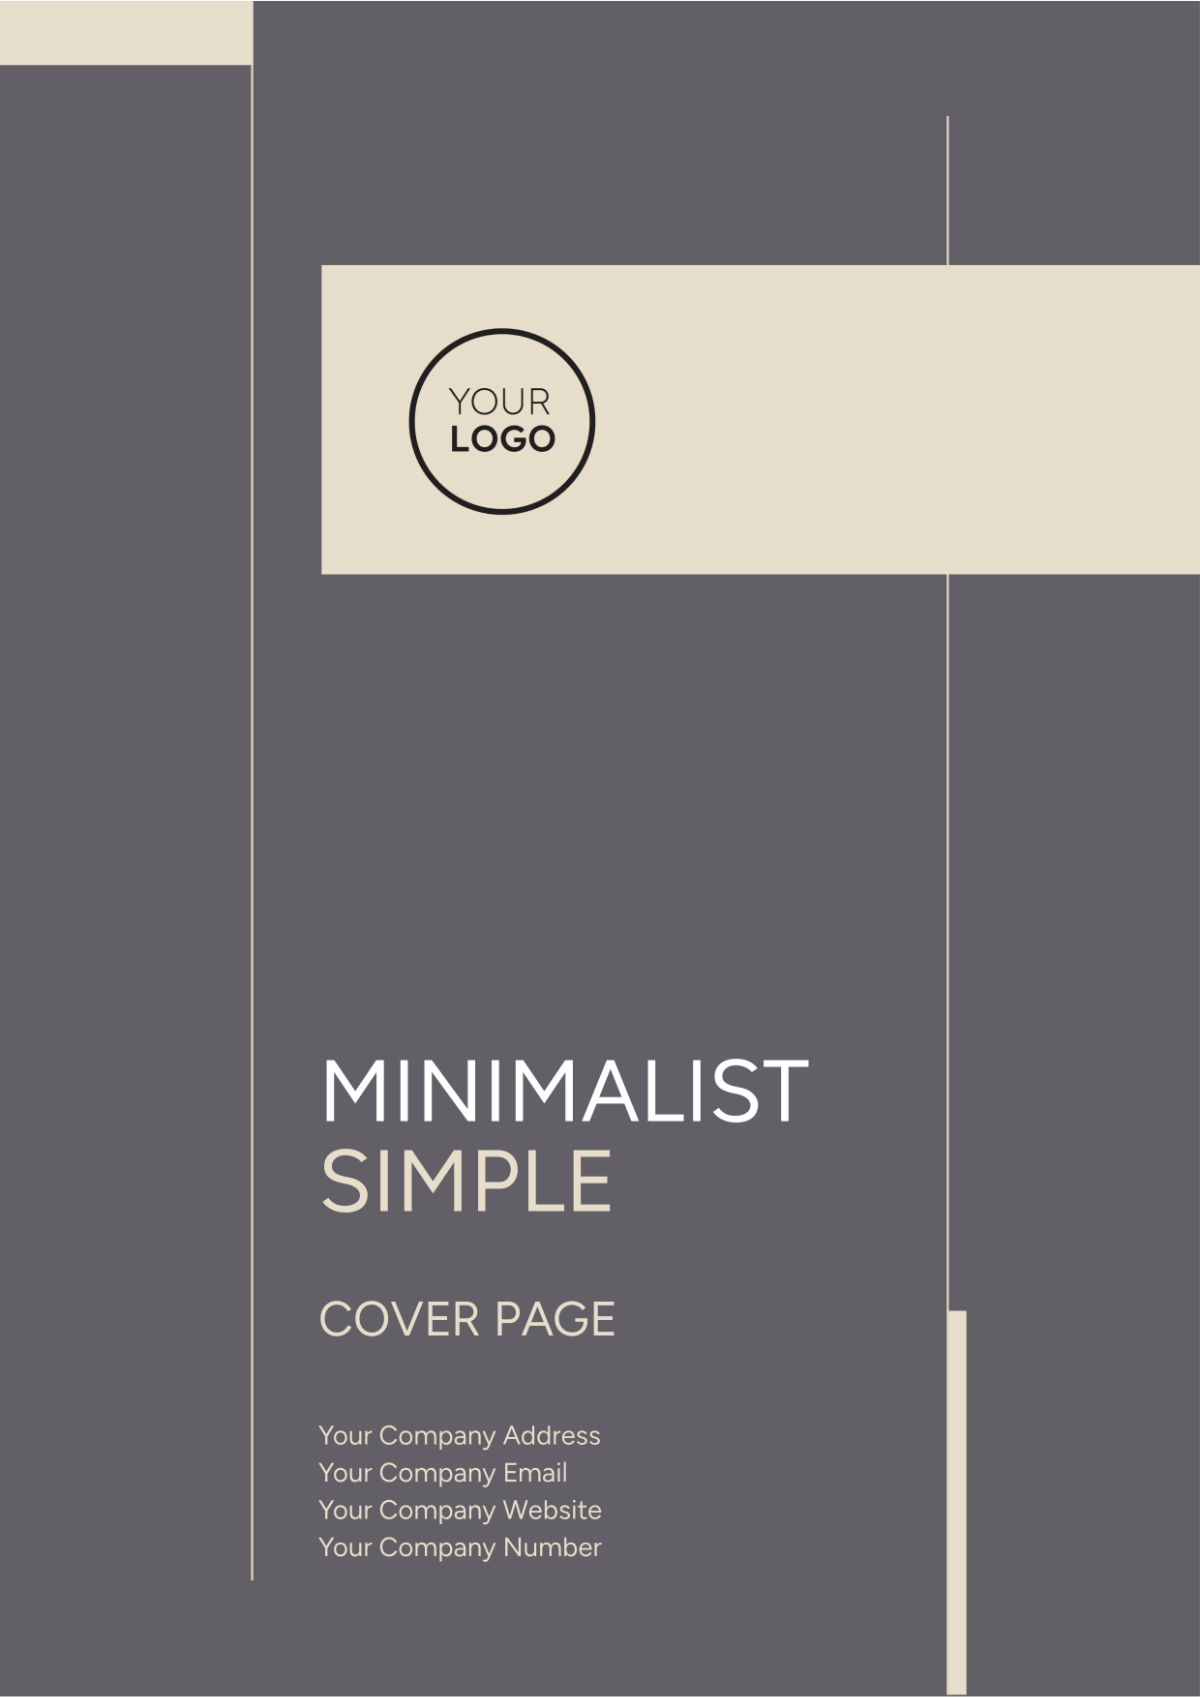 Minimalist Simple Cover Page